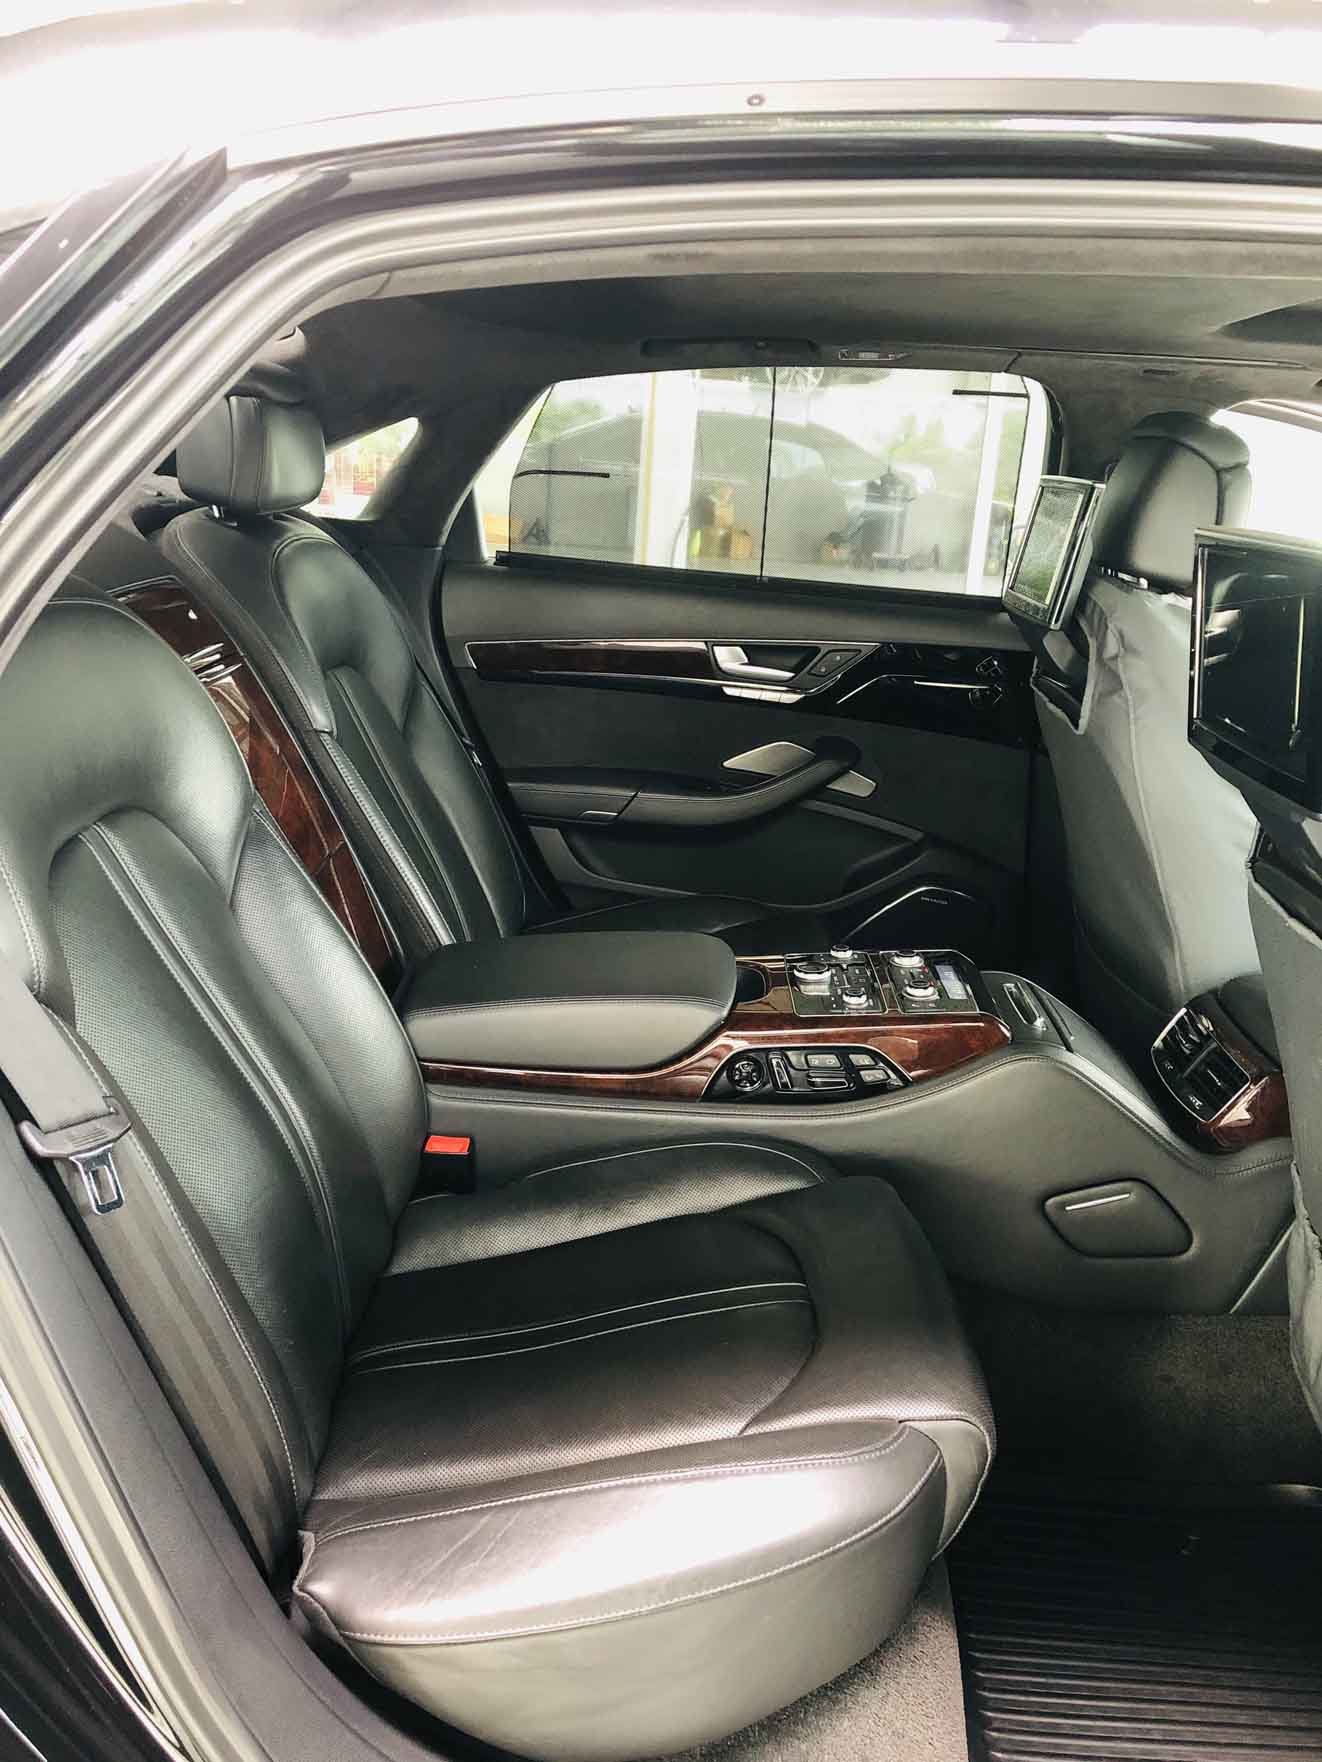 stallion approved - pre-owned audi 8 - interior view